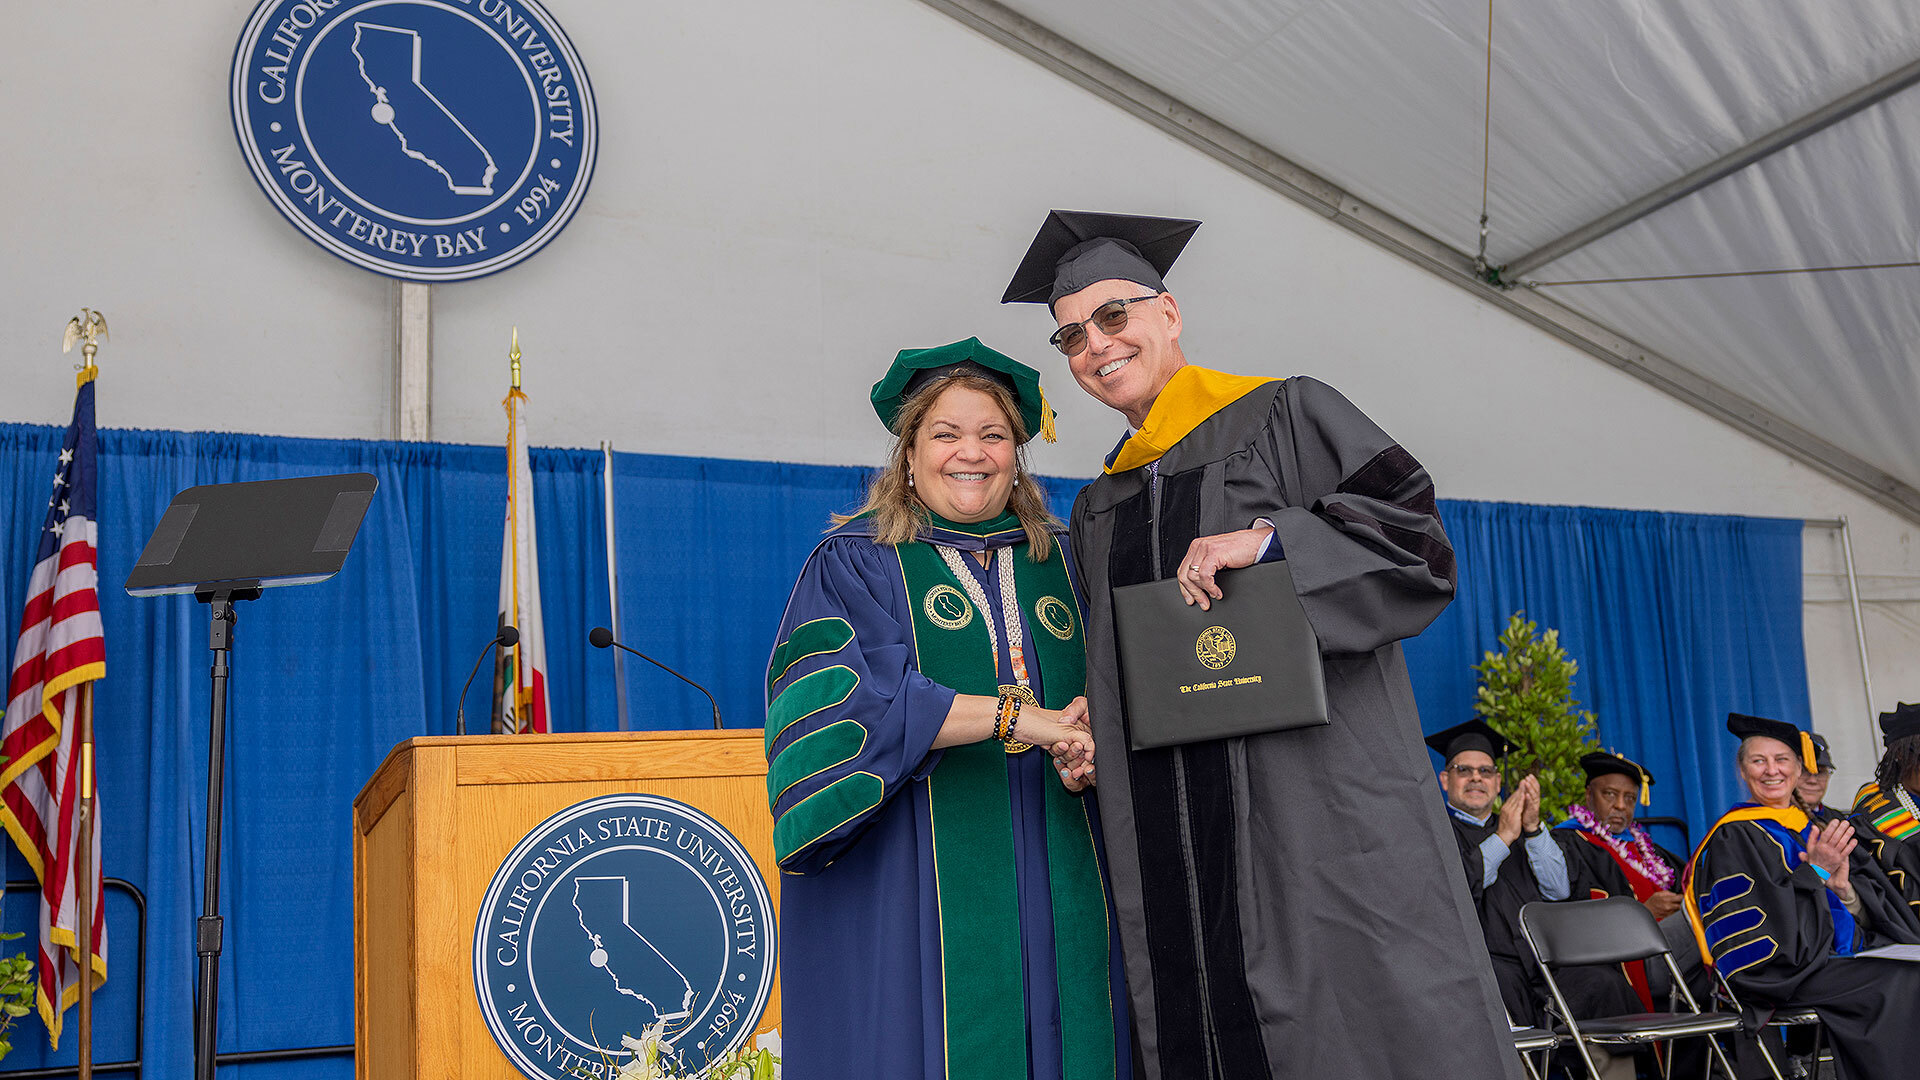 Quiñones presenting Dr. Steven Packer with an honorary Doctor of Science degree